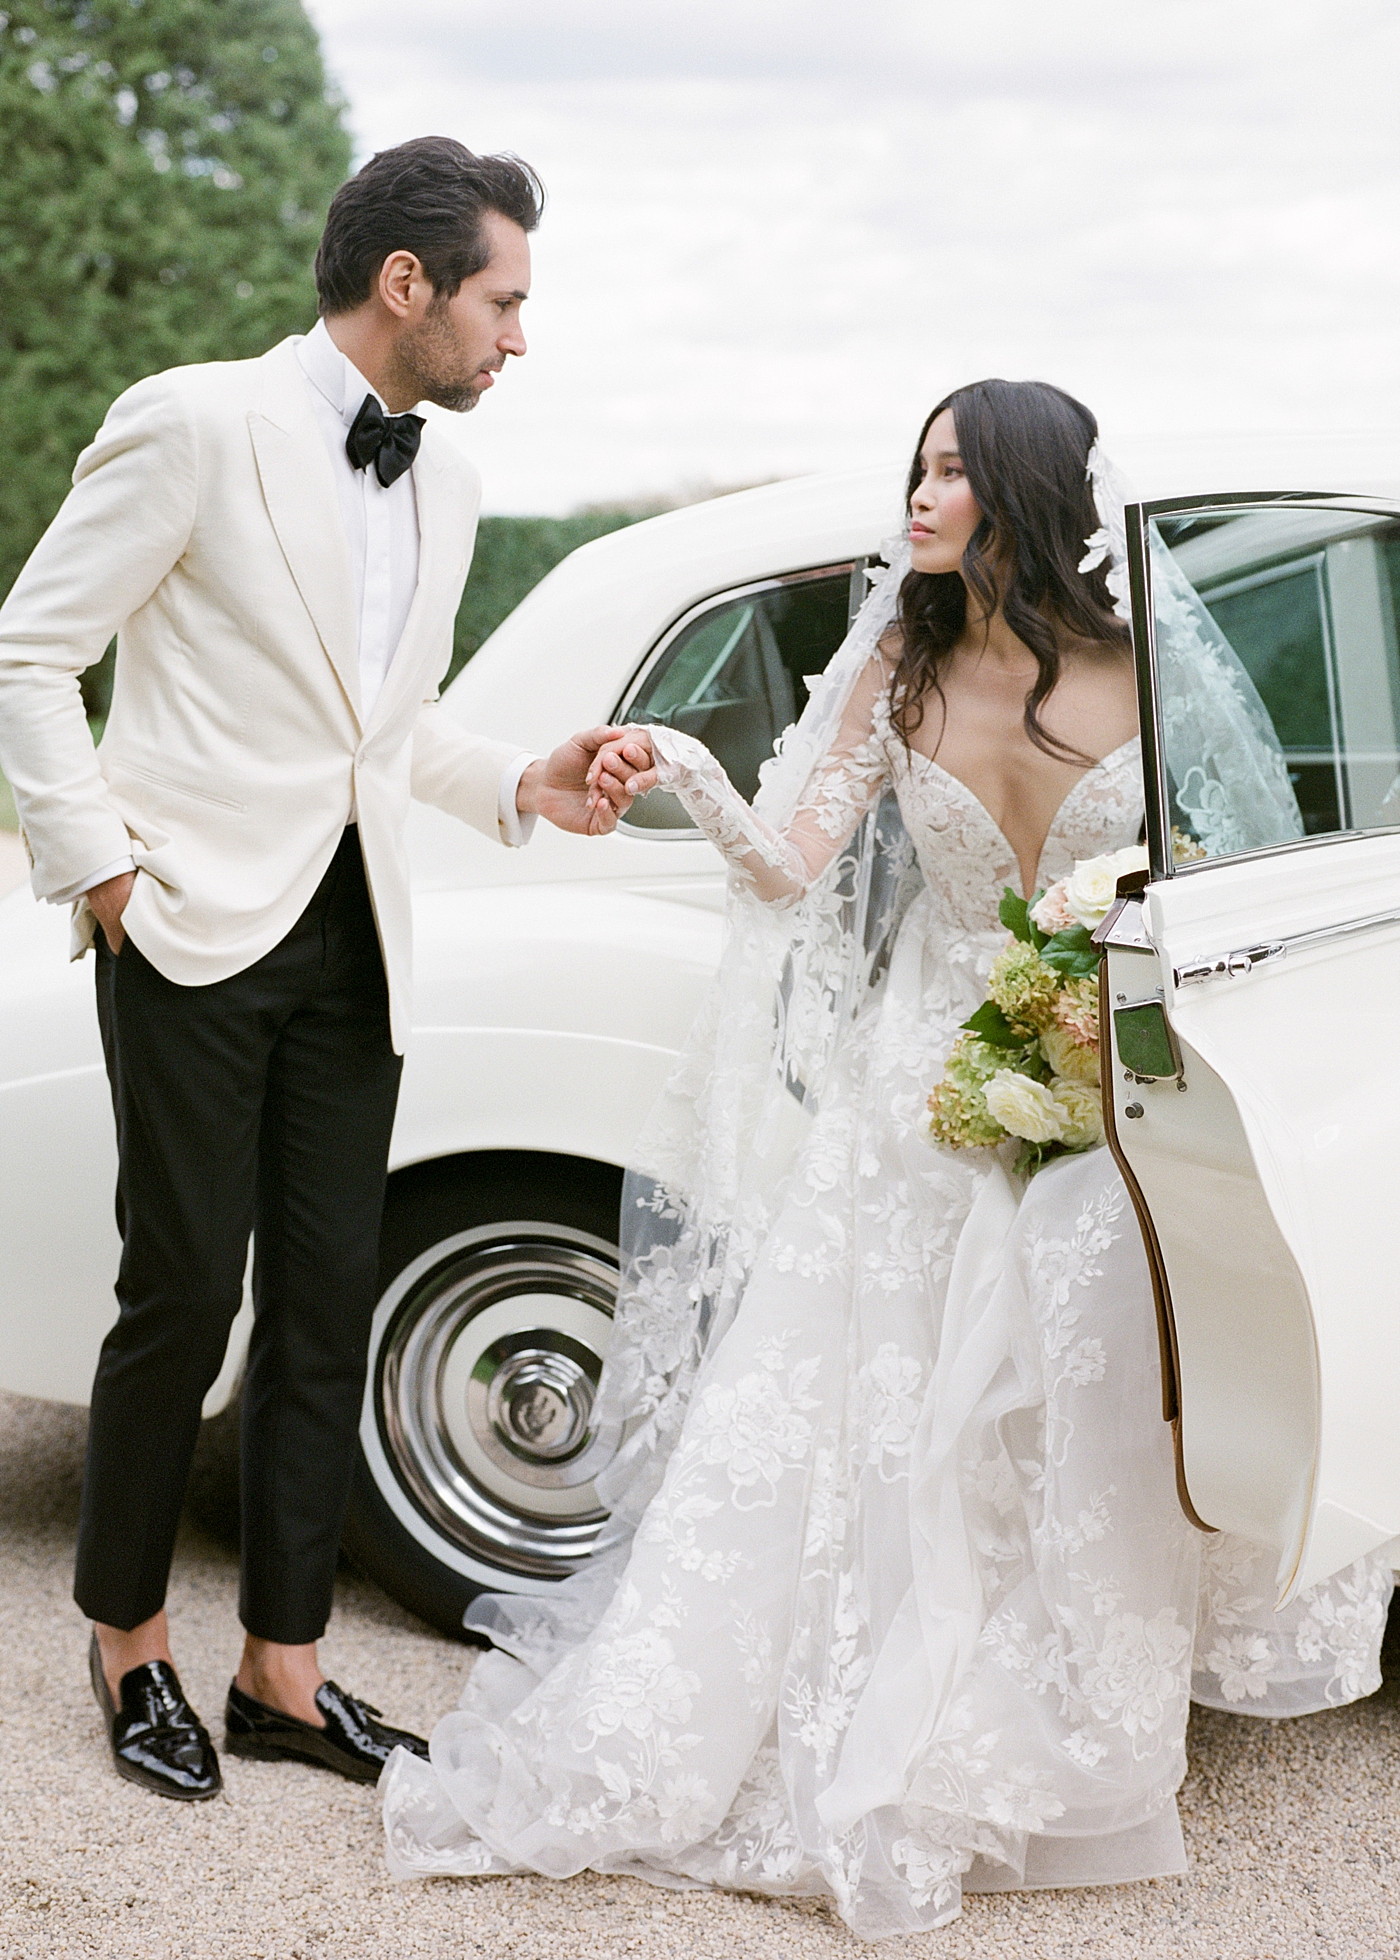 Groom helping bride out of an antique car | Image by Hope Helmuth Photography